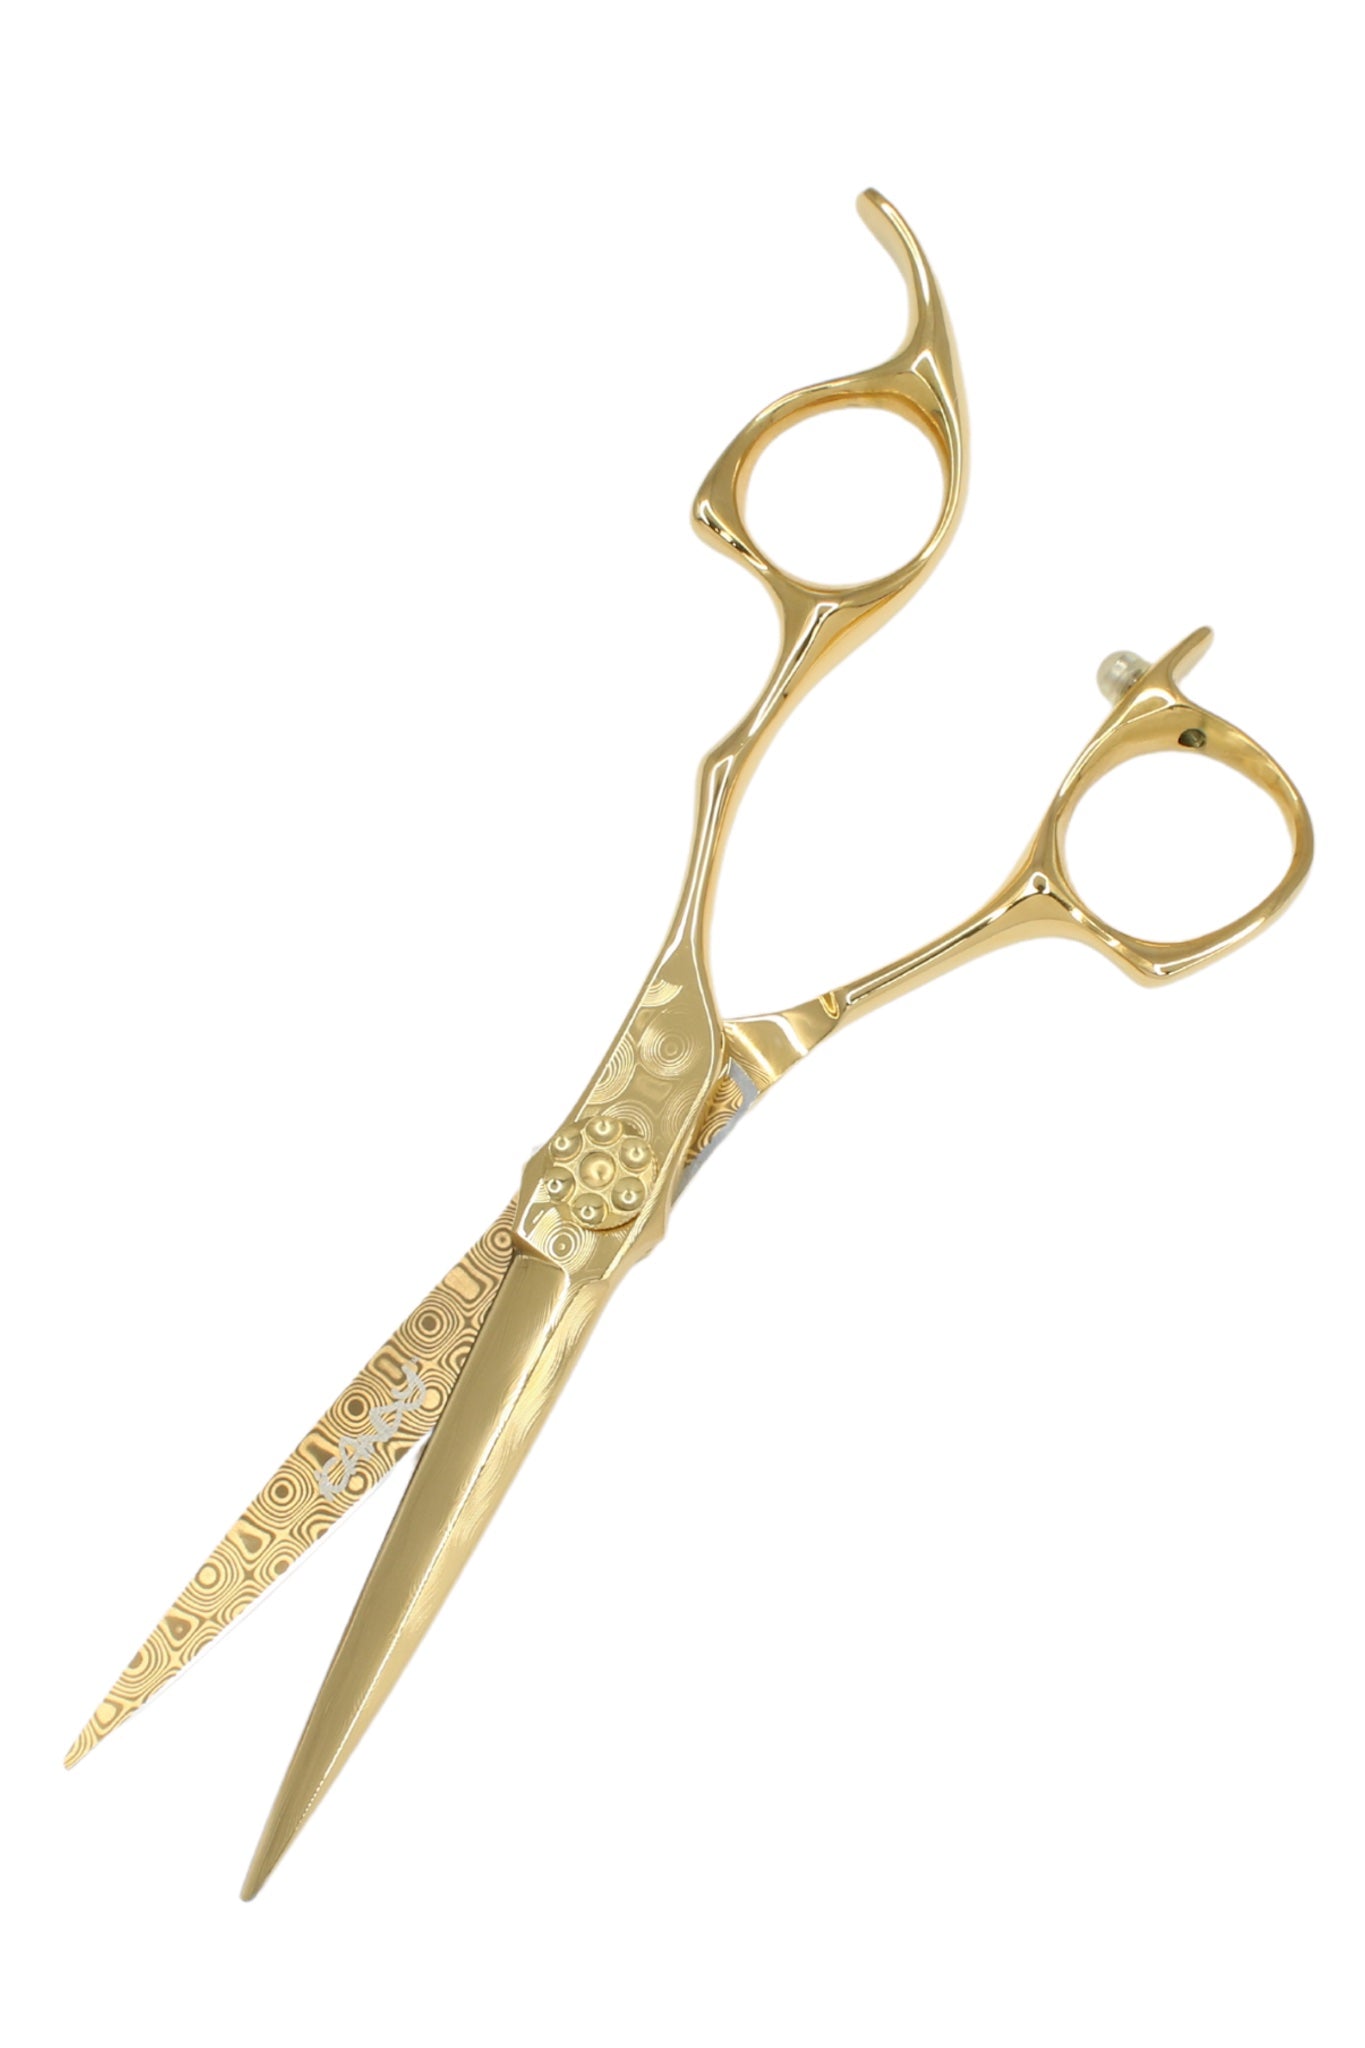 iCandy DAMASCUS ALL STAR Yellow Gold Scissor 6.0" Pic3